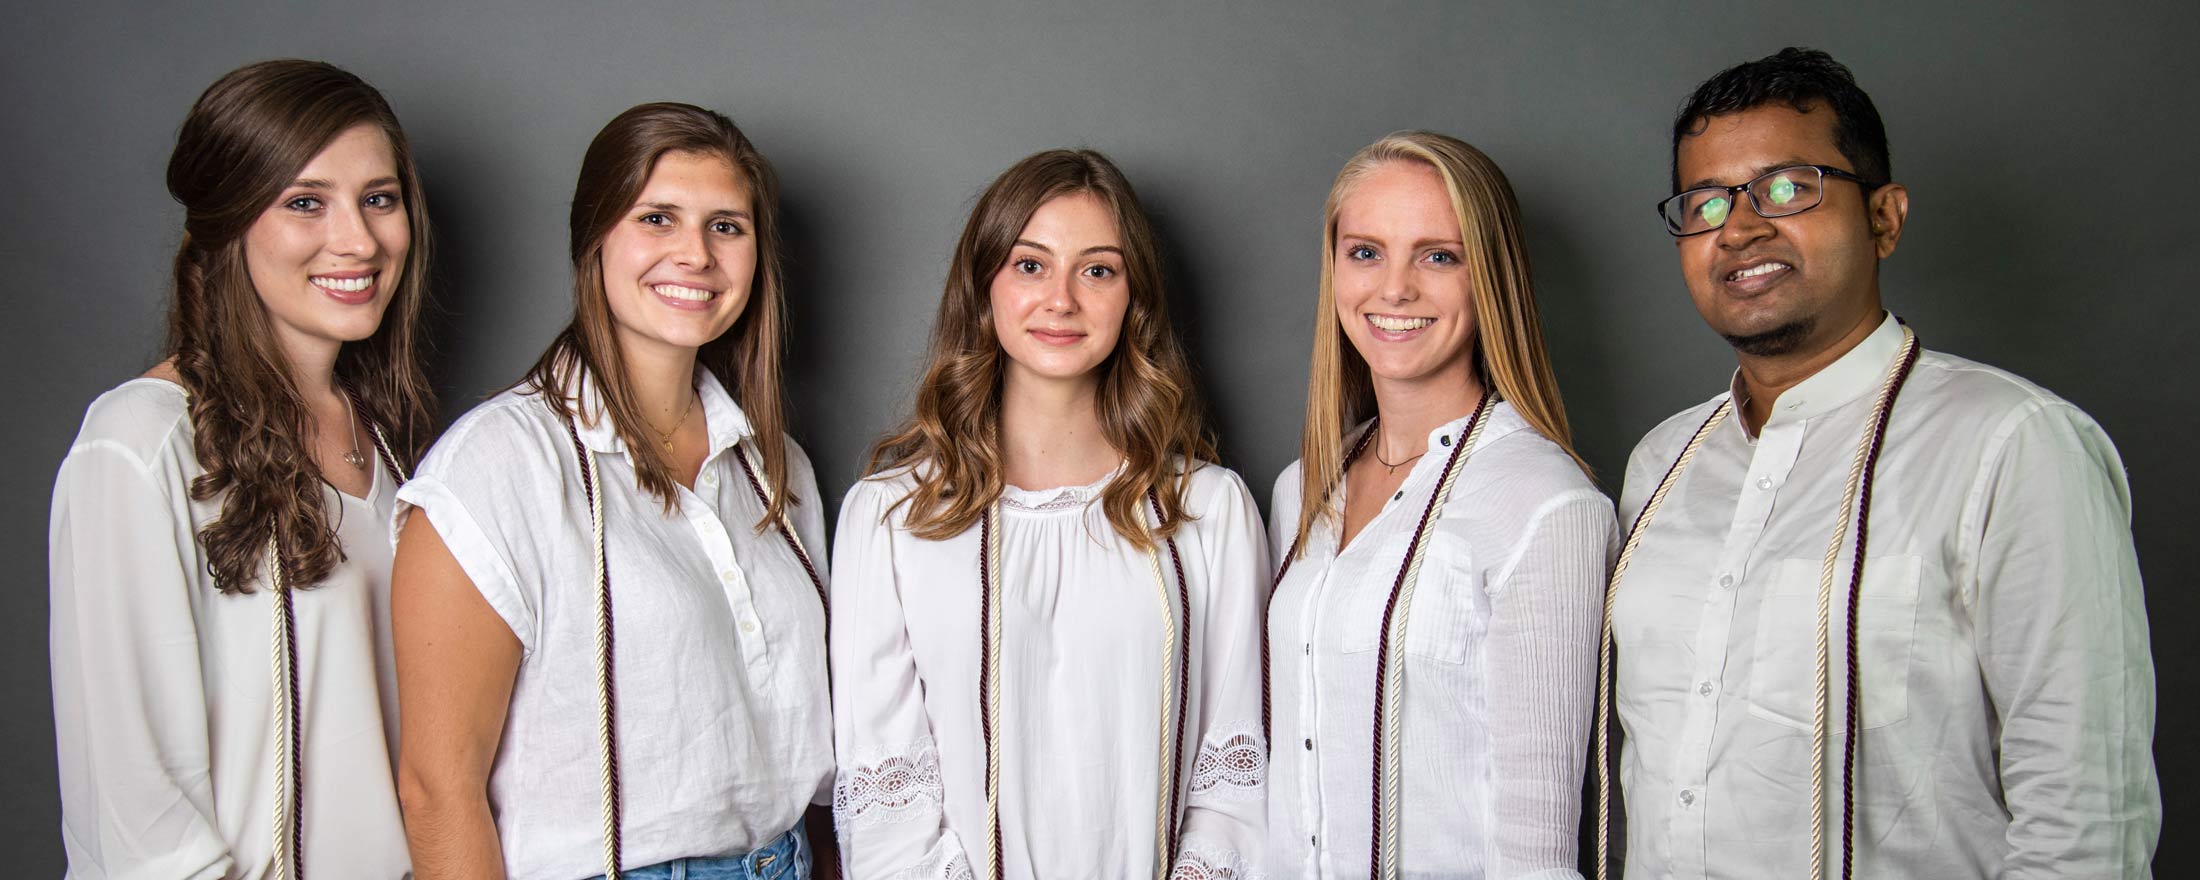 Kappa Omicron Nu officers in white tops on a gray background.